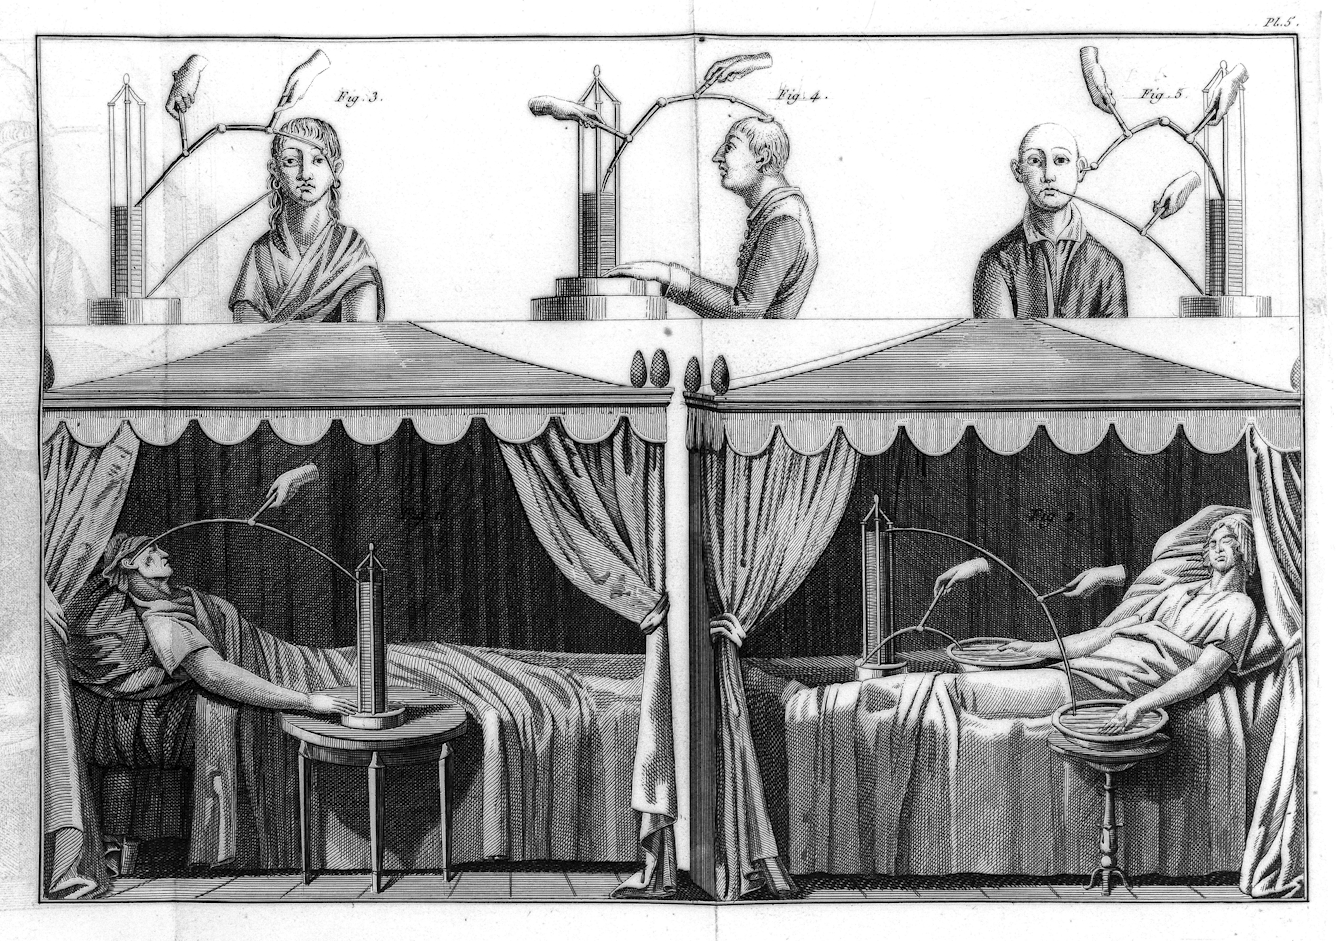 Black and white etching showing five people. On the top, against a white background, three people are shown from the shoulders up with electrical apparatus attached to them and disembodied hands operating the equipment. On the bottom, against a dark background of curtains and drapes, two recumbent corpses are attached to similar equipment positioned on a table beside their beds, also with disembodied hands operating it. 